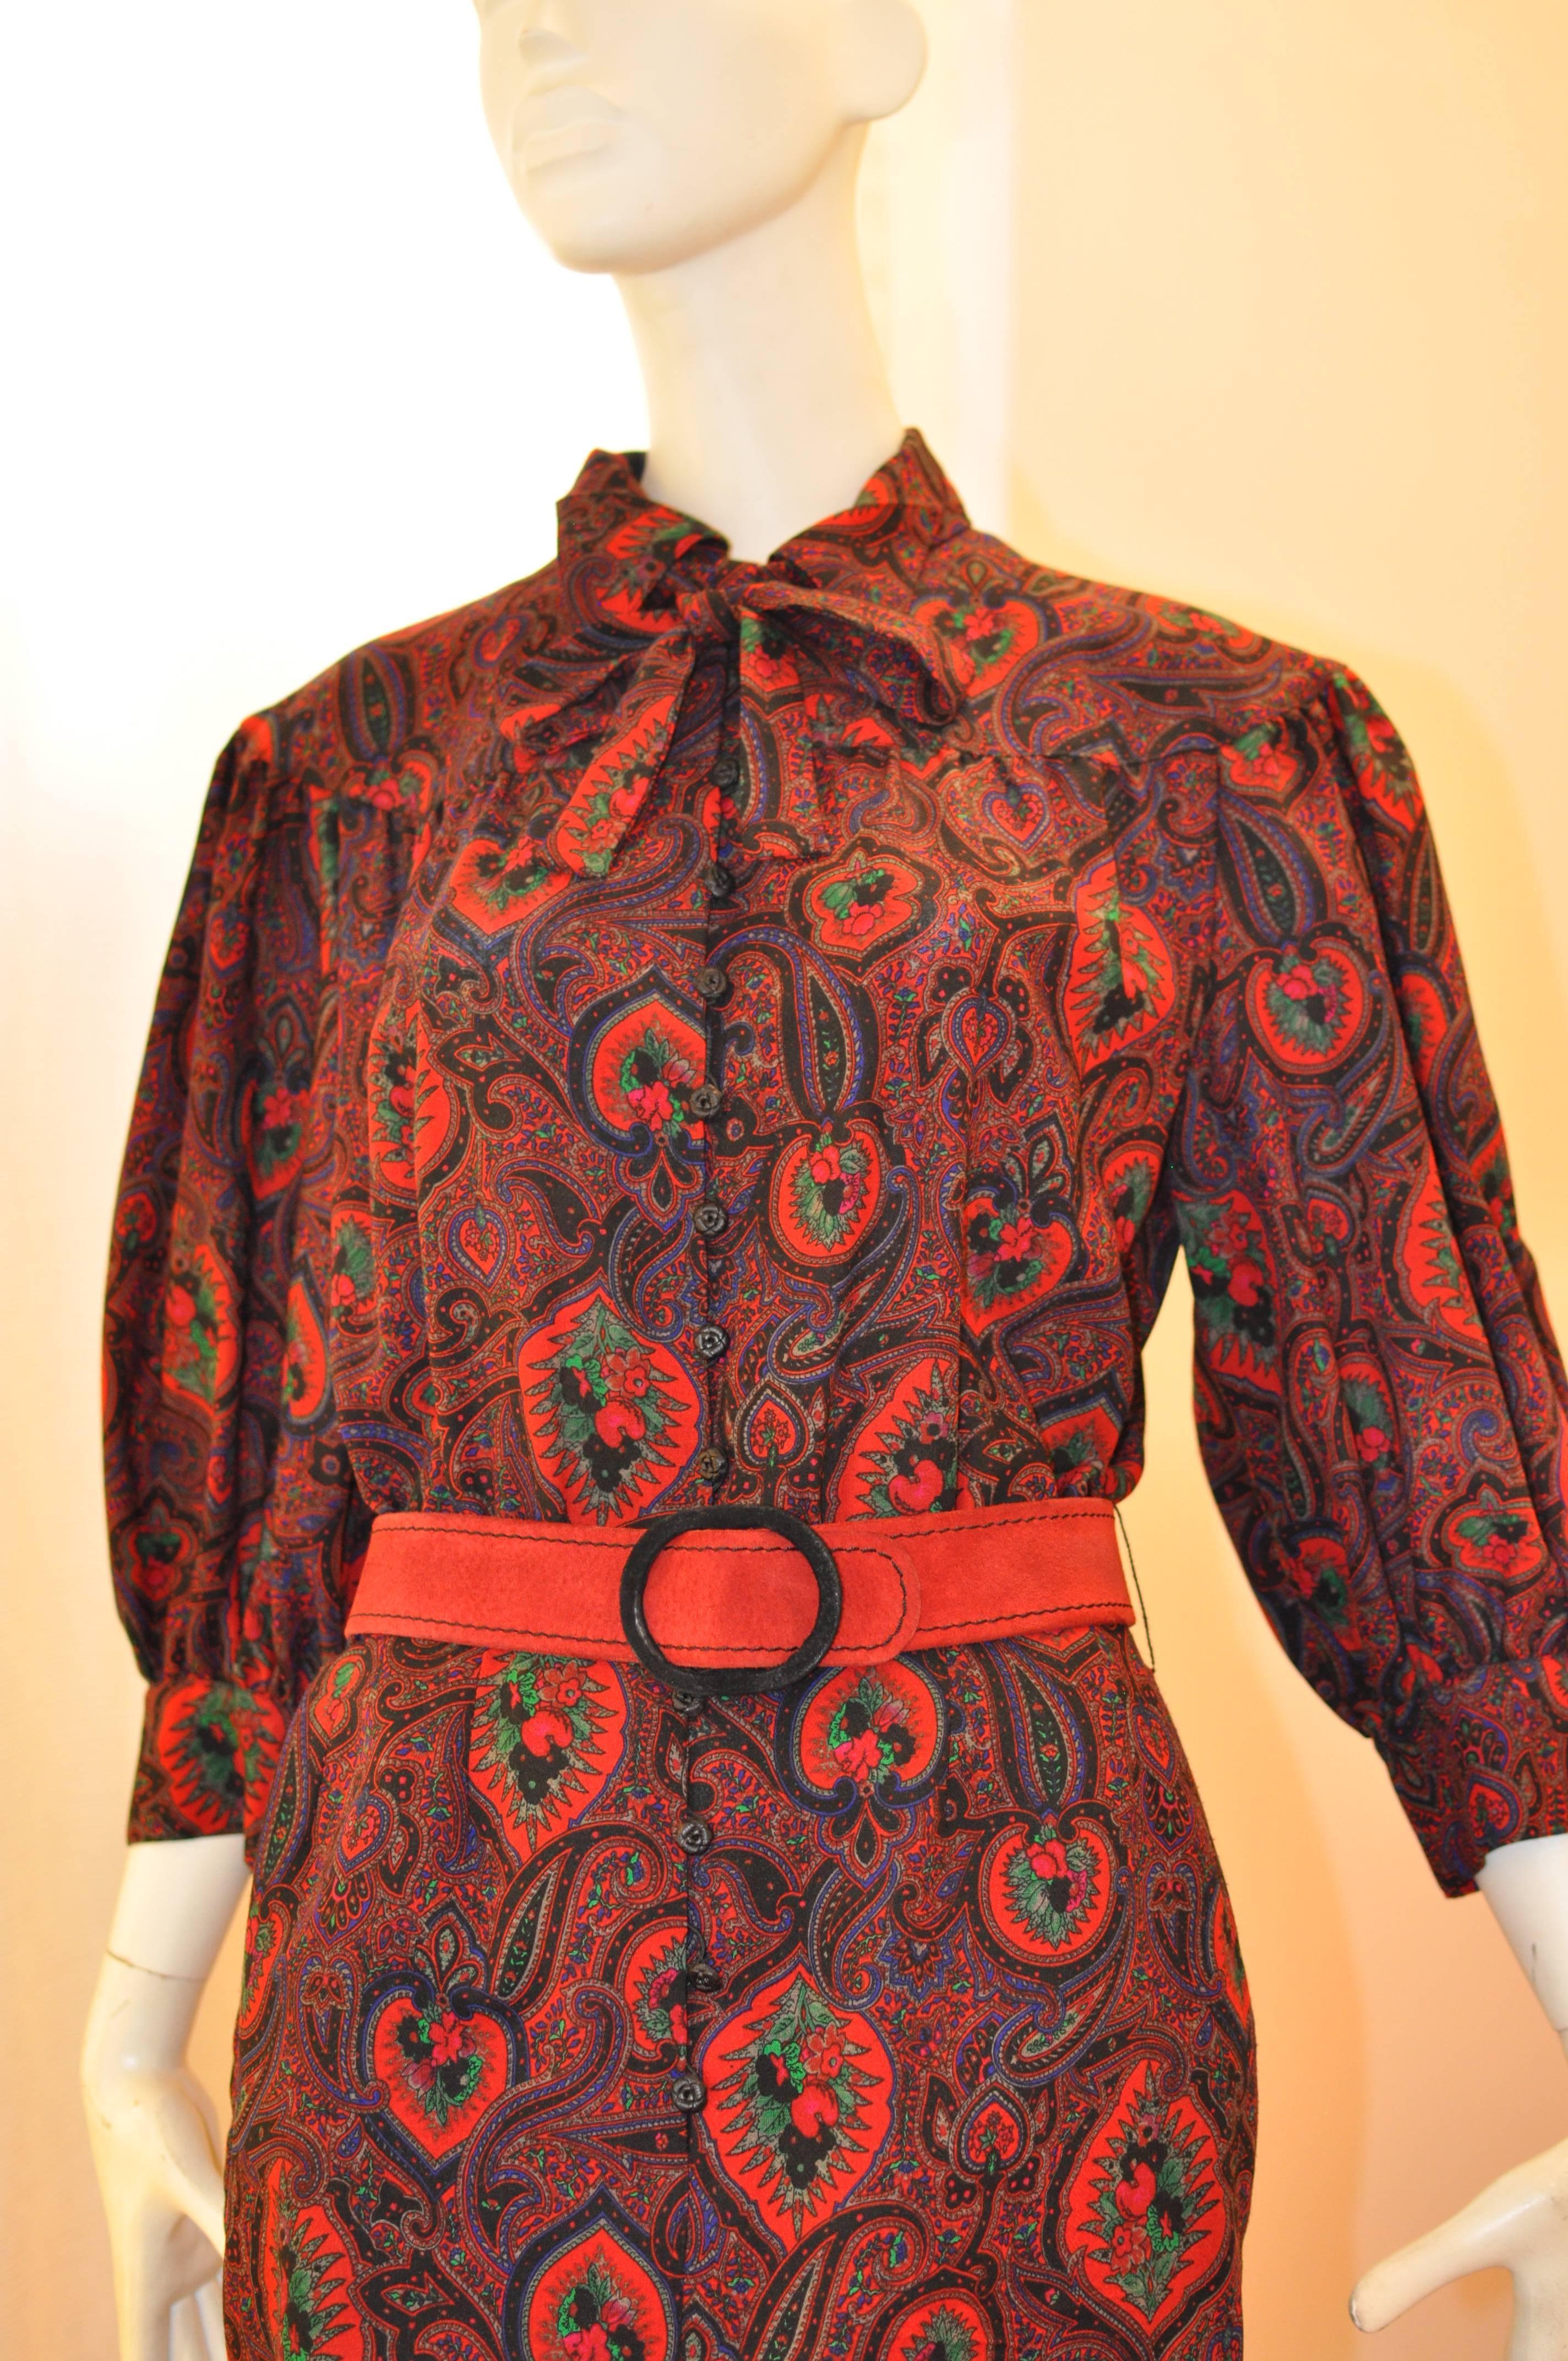 I believe this dress is Scherrer's 1990 collection. It is made of a light wool weave, and the colours are red, green and black, with a red suede belt. The balloon sleeves have two rose buttons at the cuff, which is also seen on the front of the